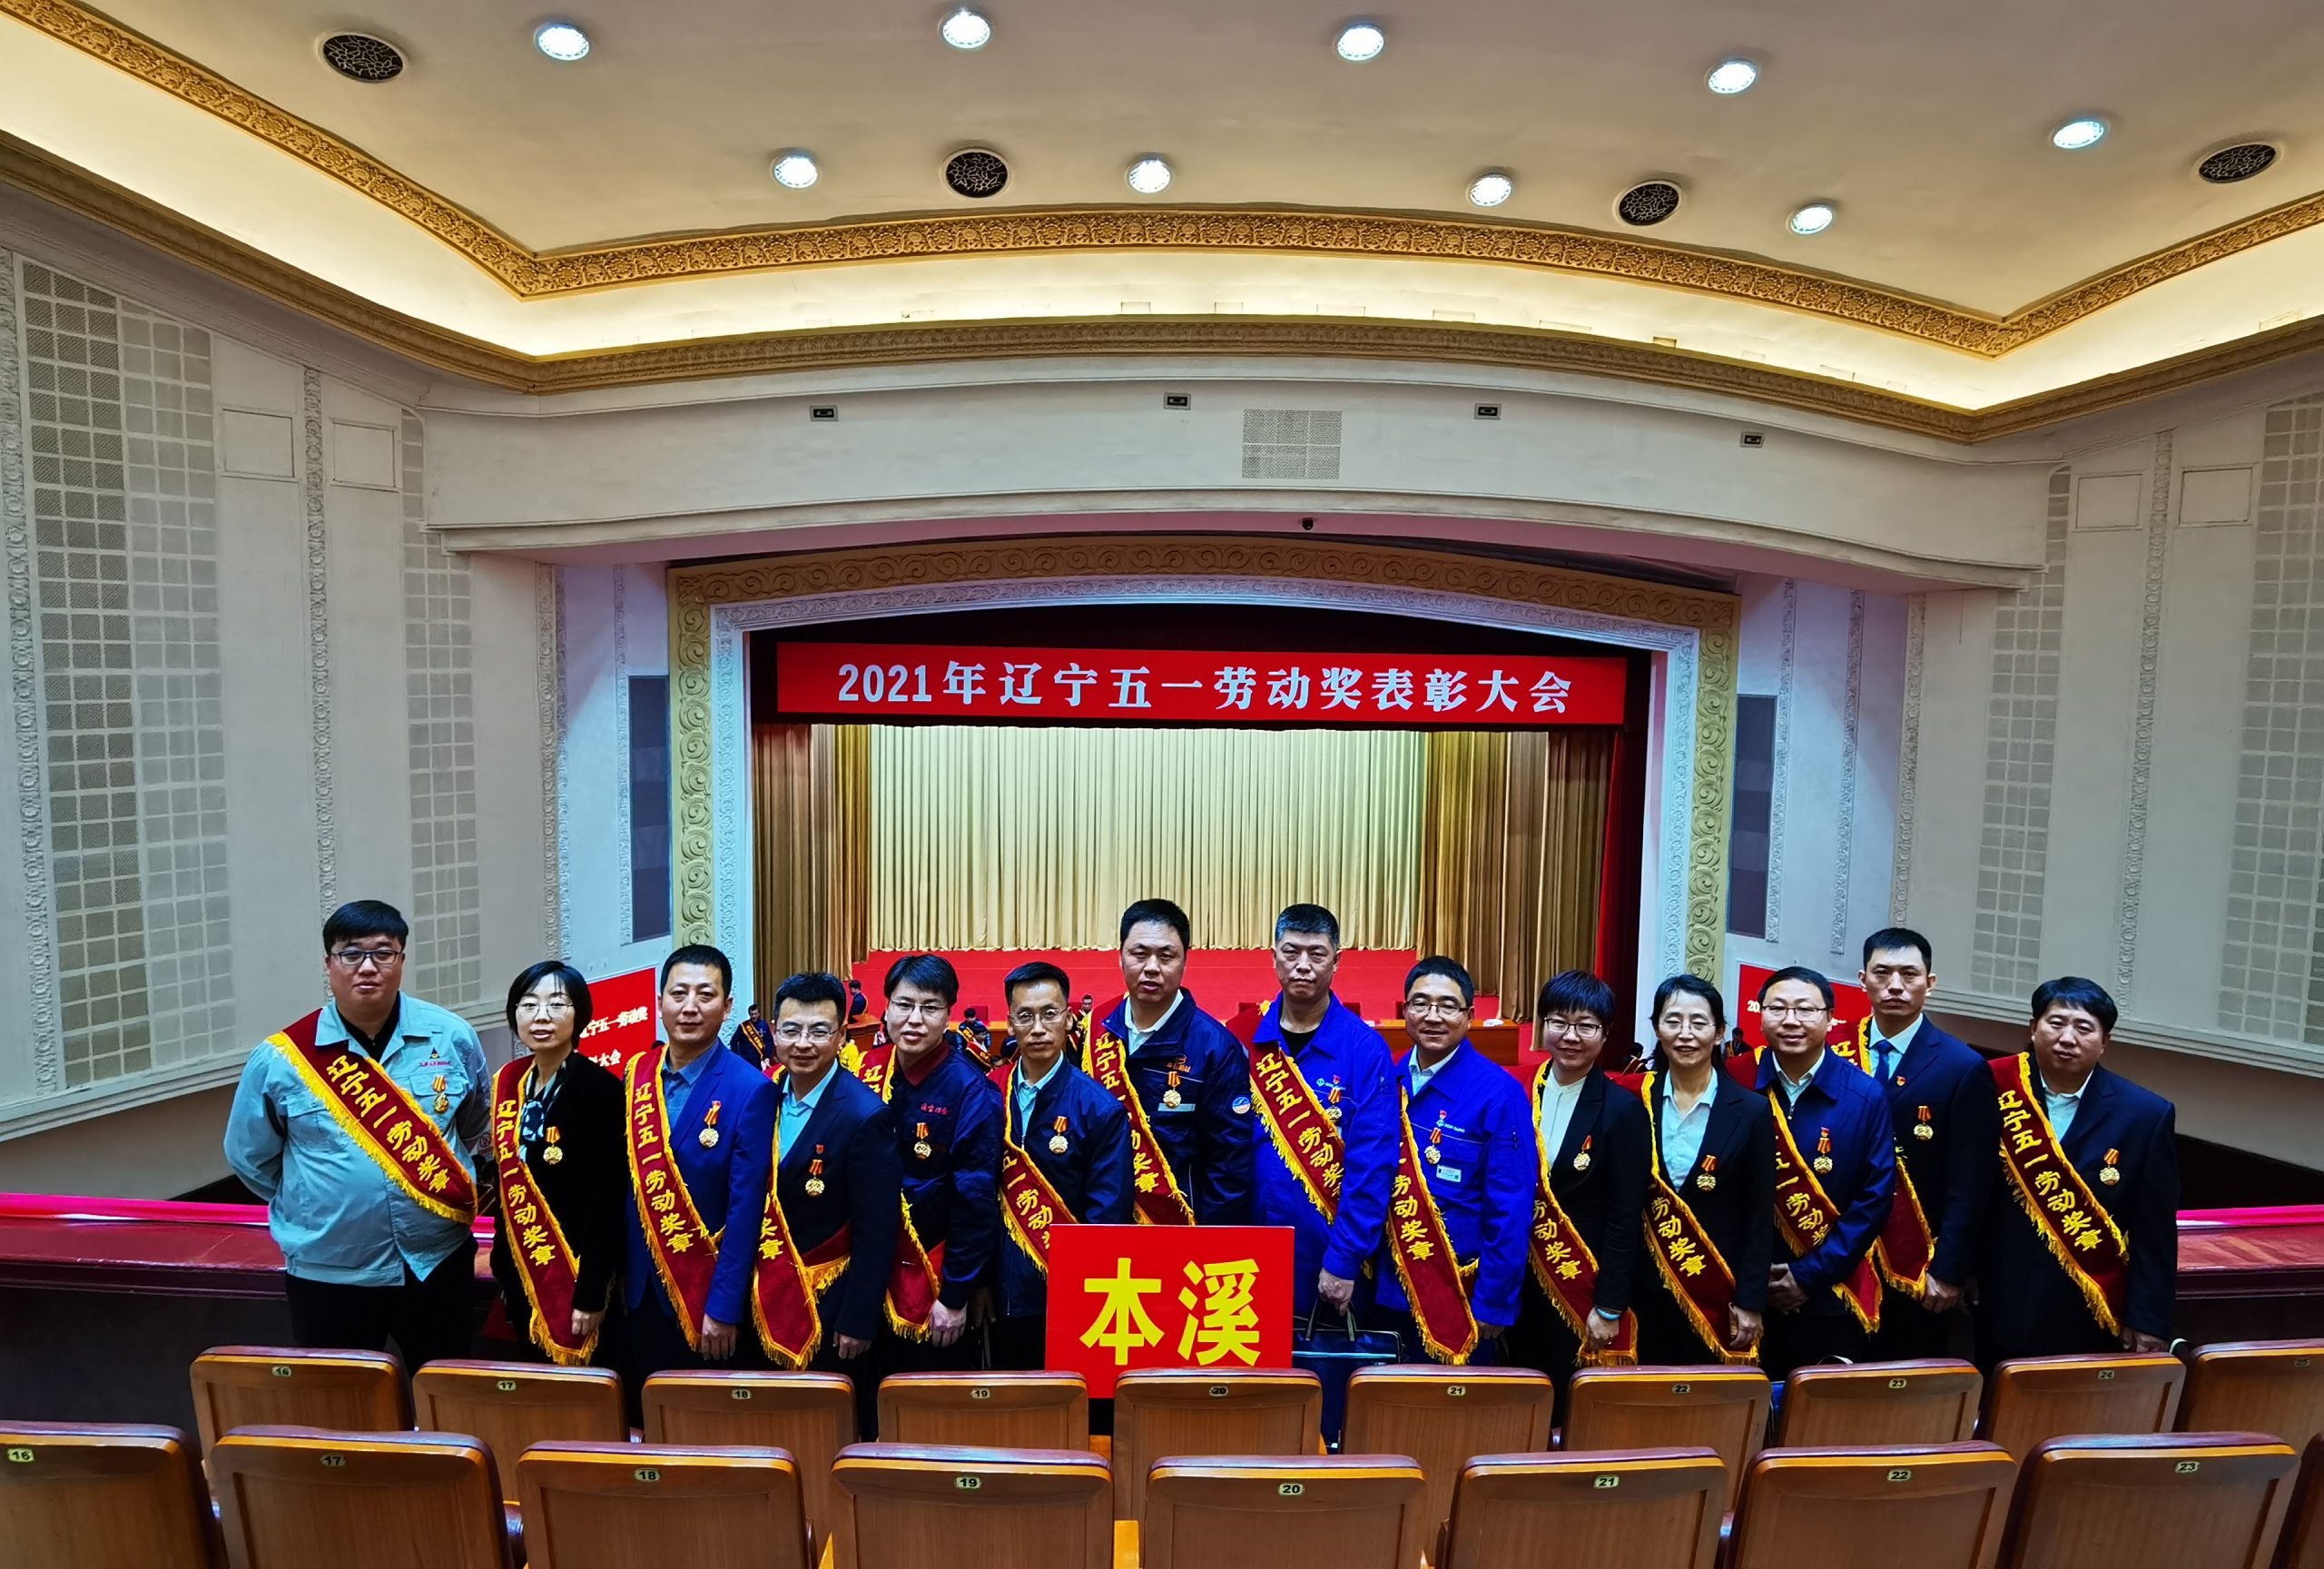 Warmly congratulate Wu Mingde to win the title of “Liaoning Province May Day Labor Medal”